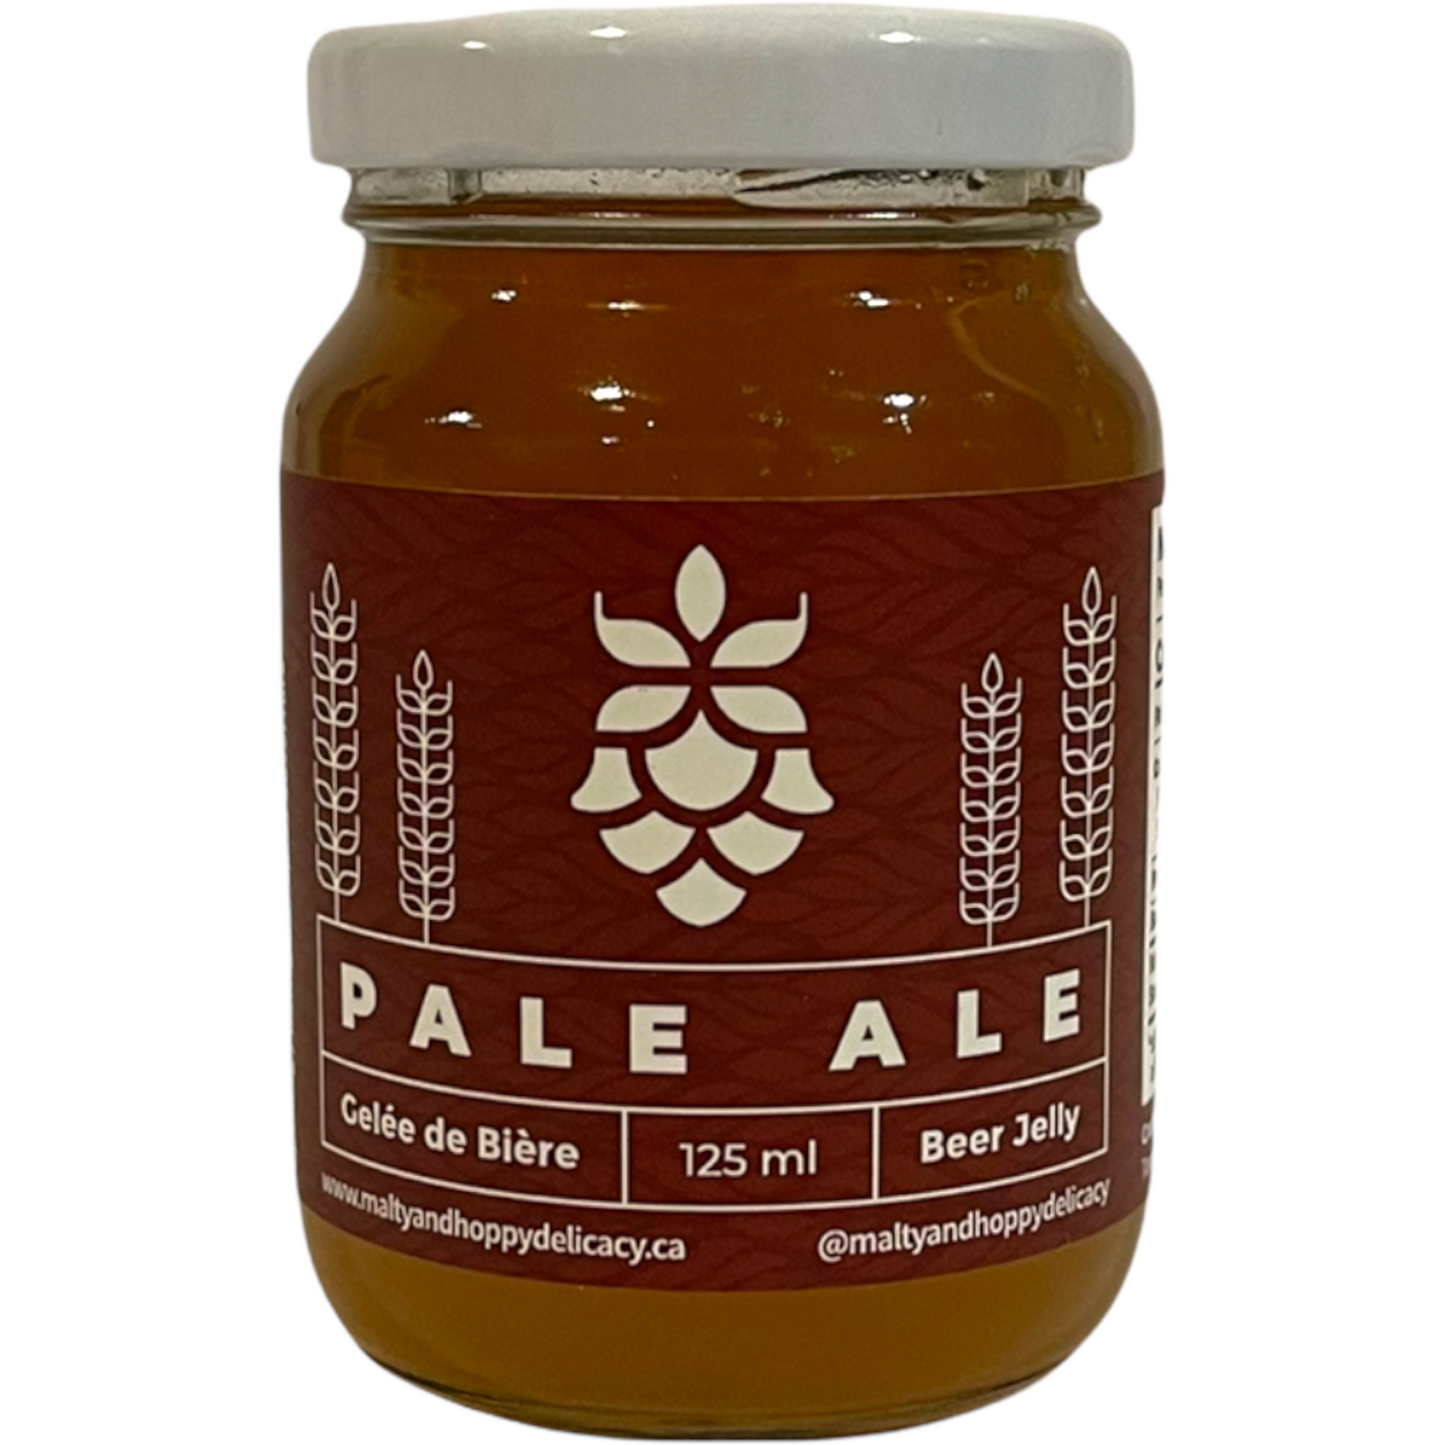 MALTY and HOPPY PALE ALE BEER JELLY